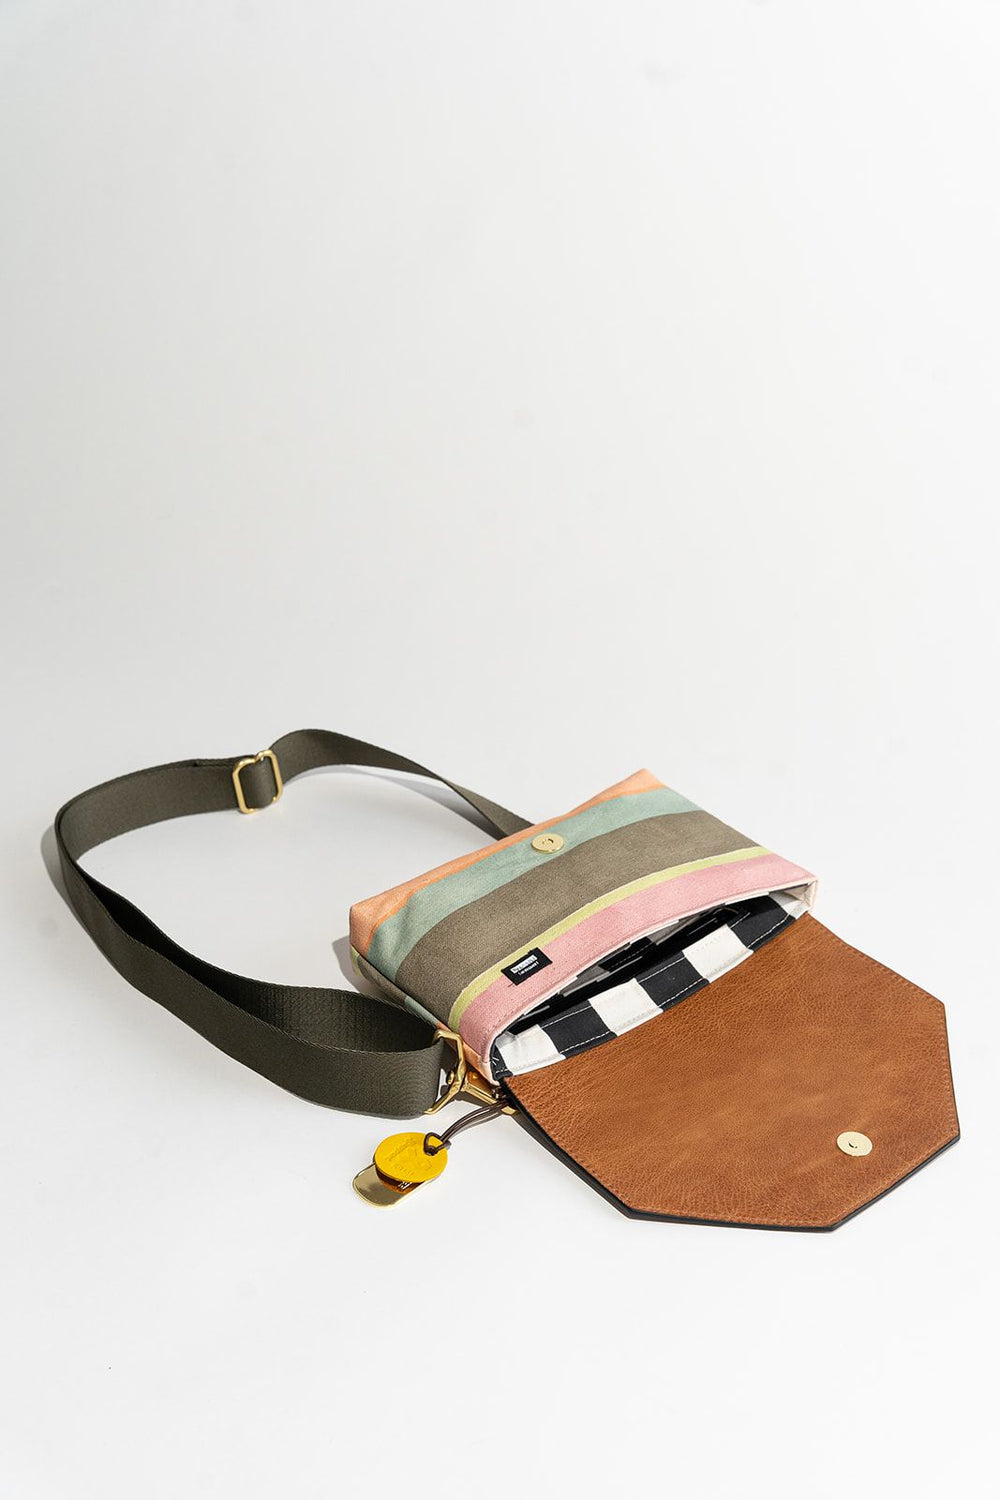 Patton | Sunset Stripe Printed Canvas + Brown Leather W/ Fatigue Webbed Strap